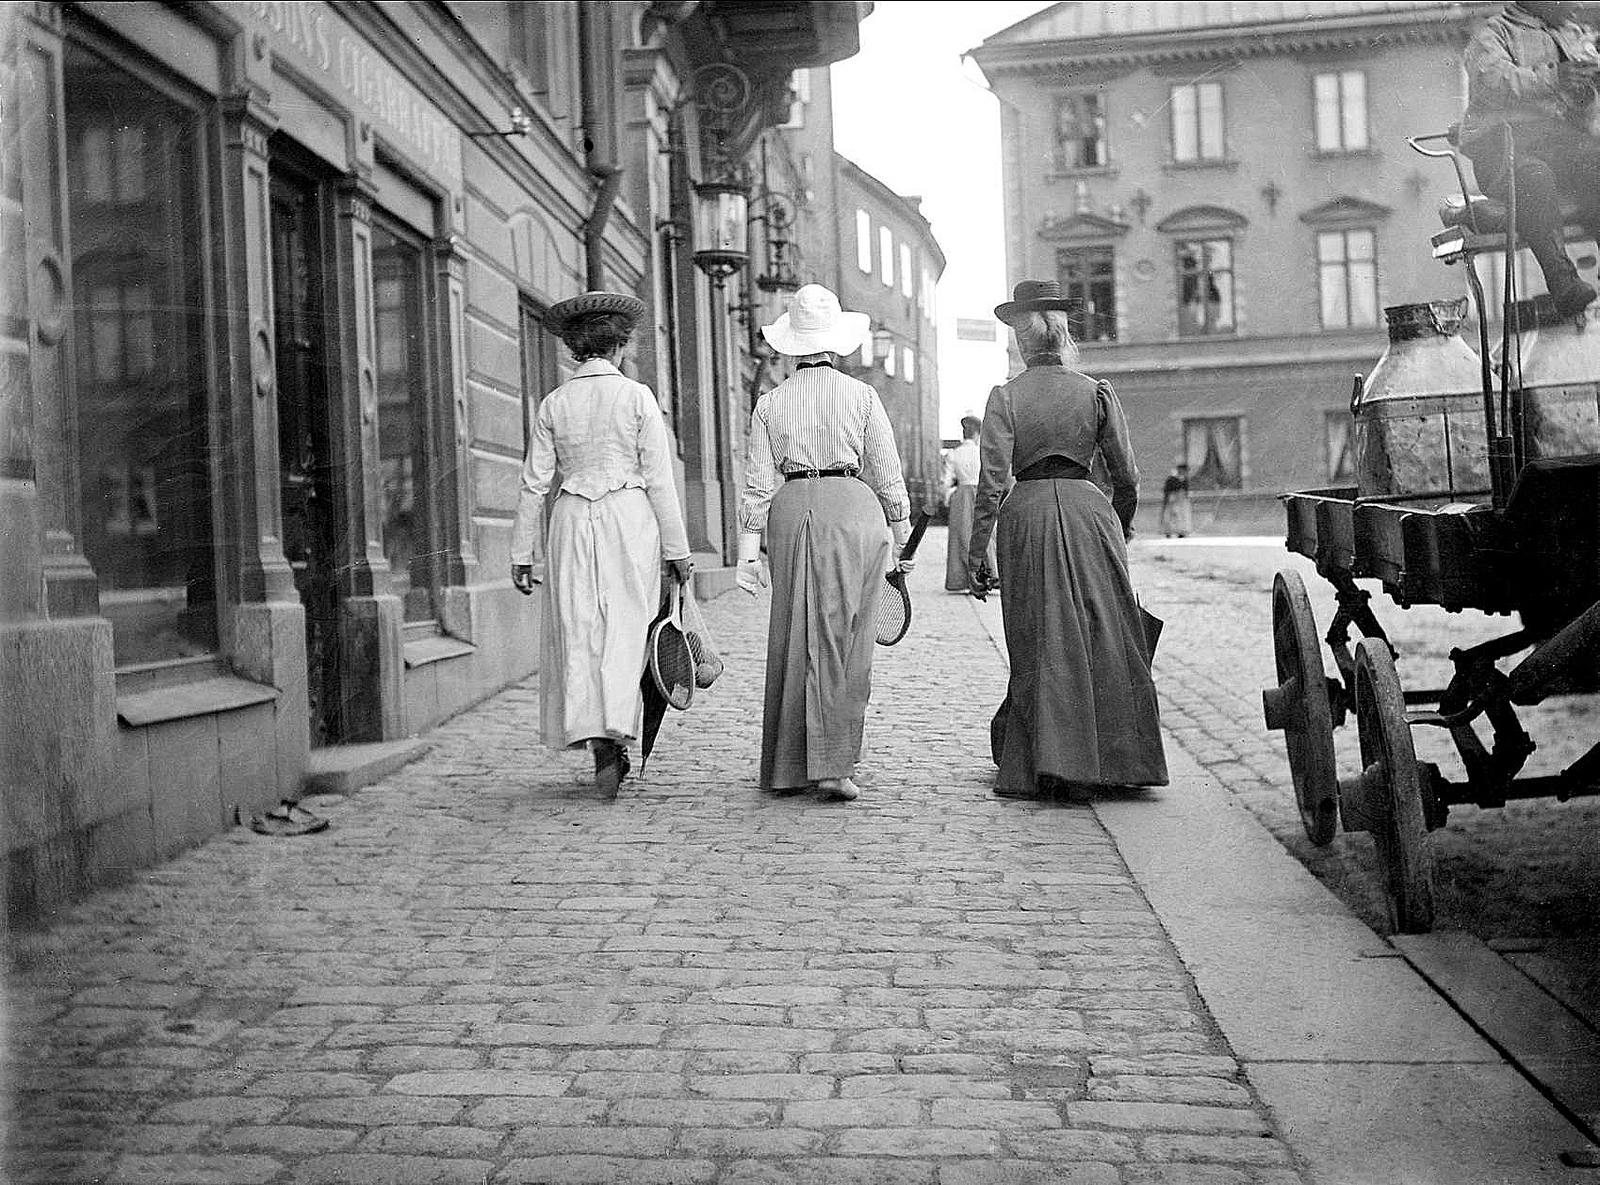 Walking home after an afternoon of tennis, Uppsala, Sweden in 1902.